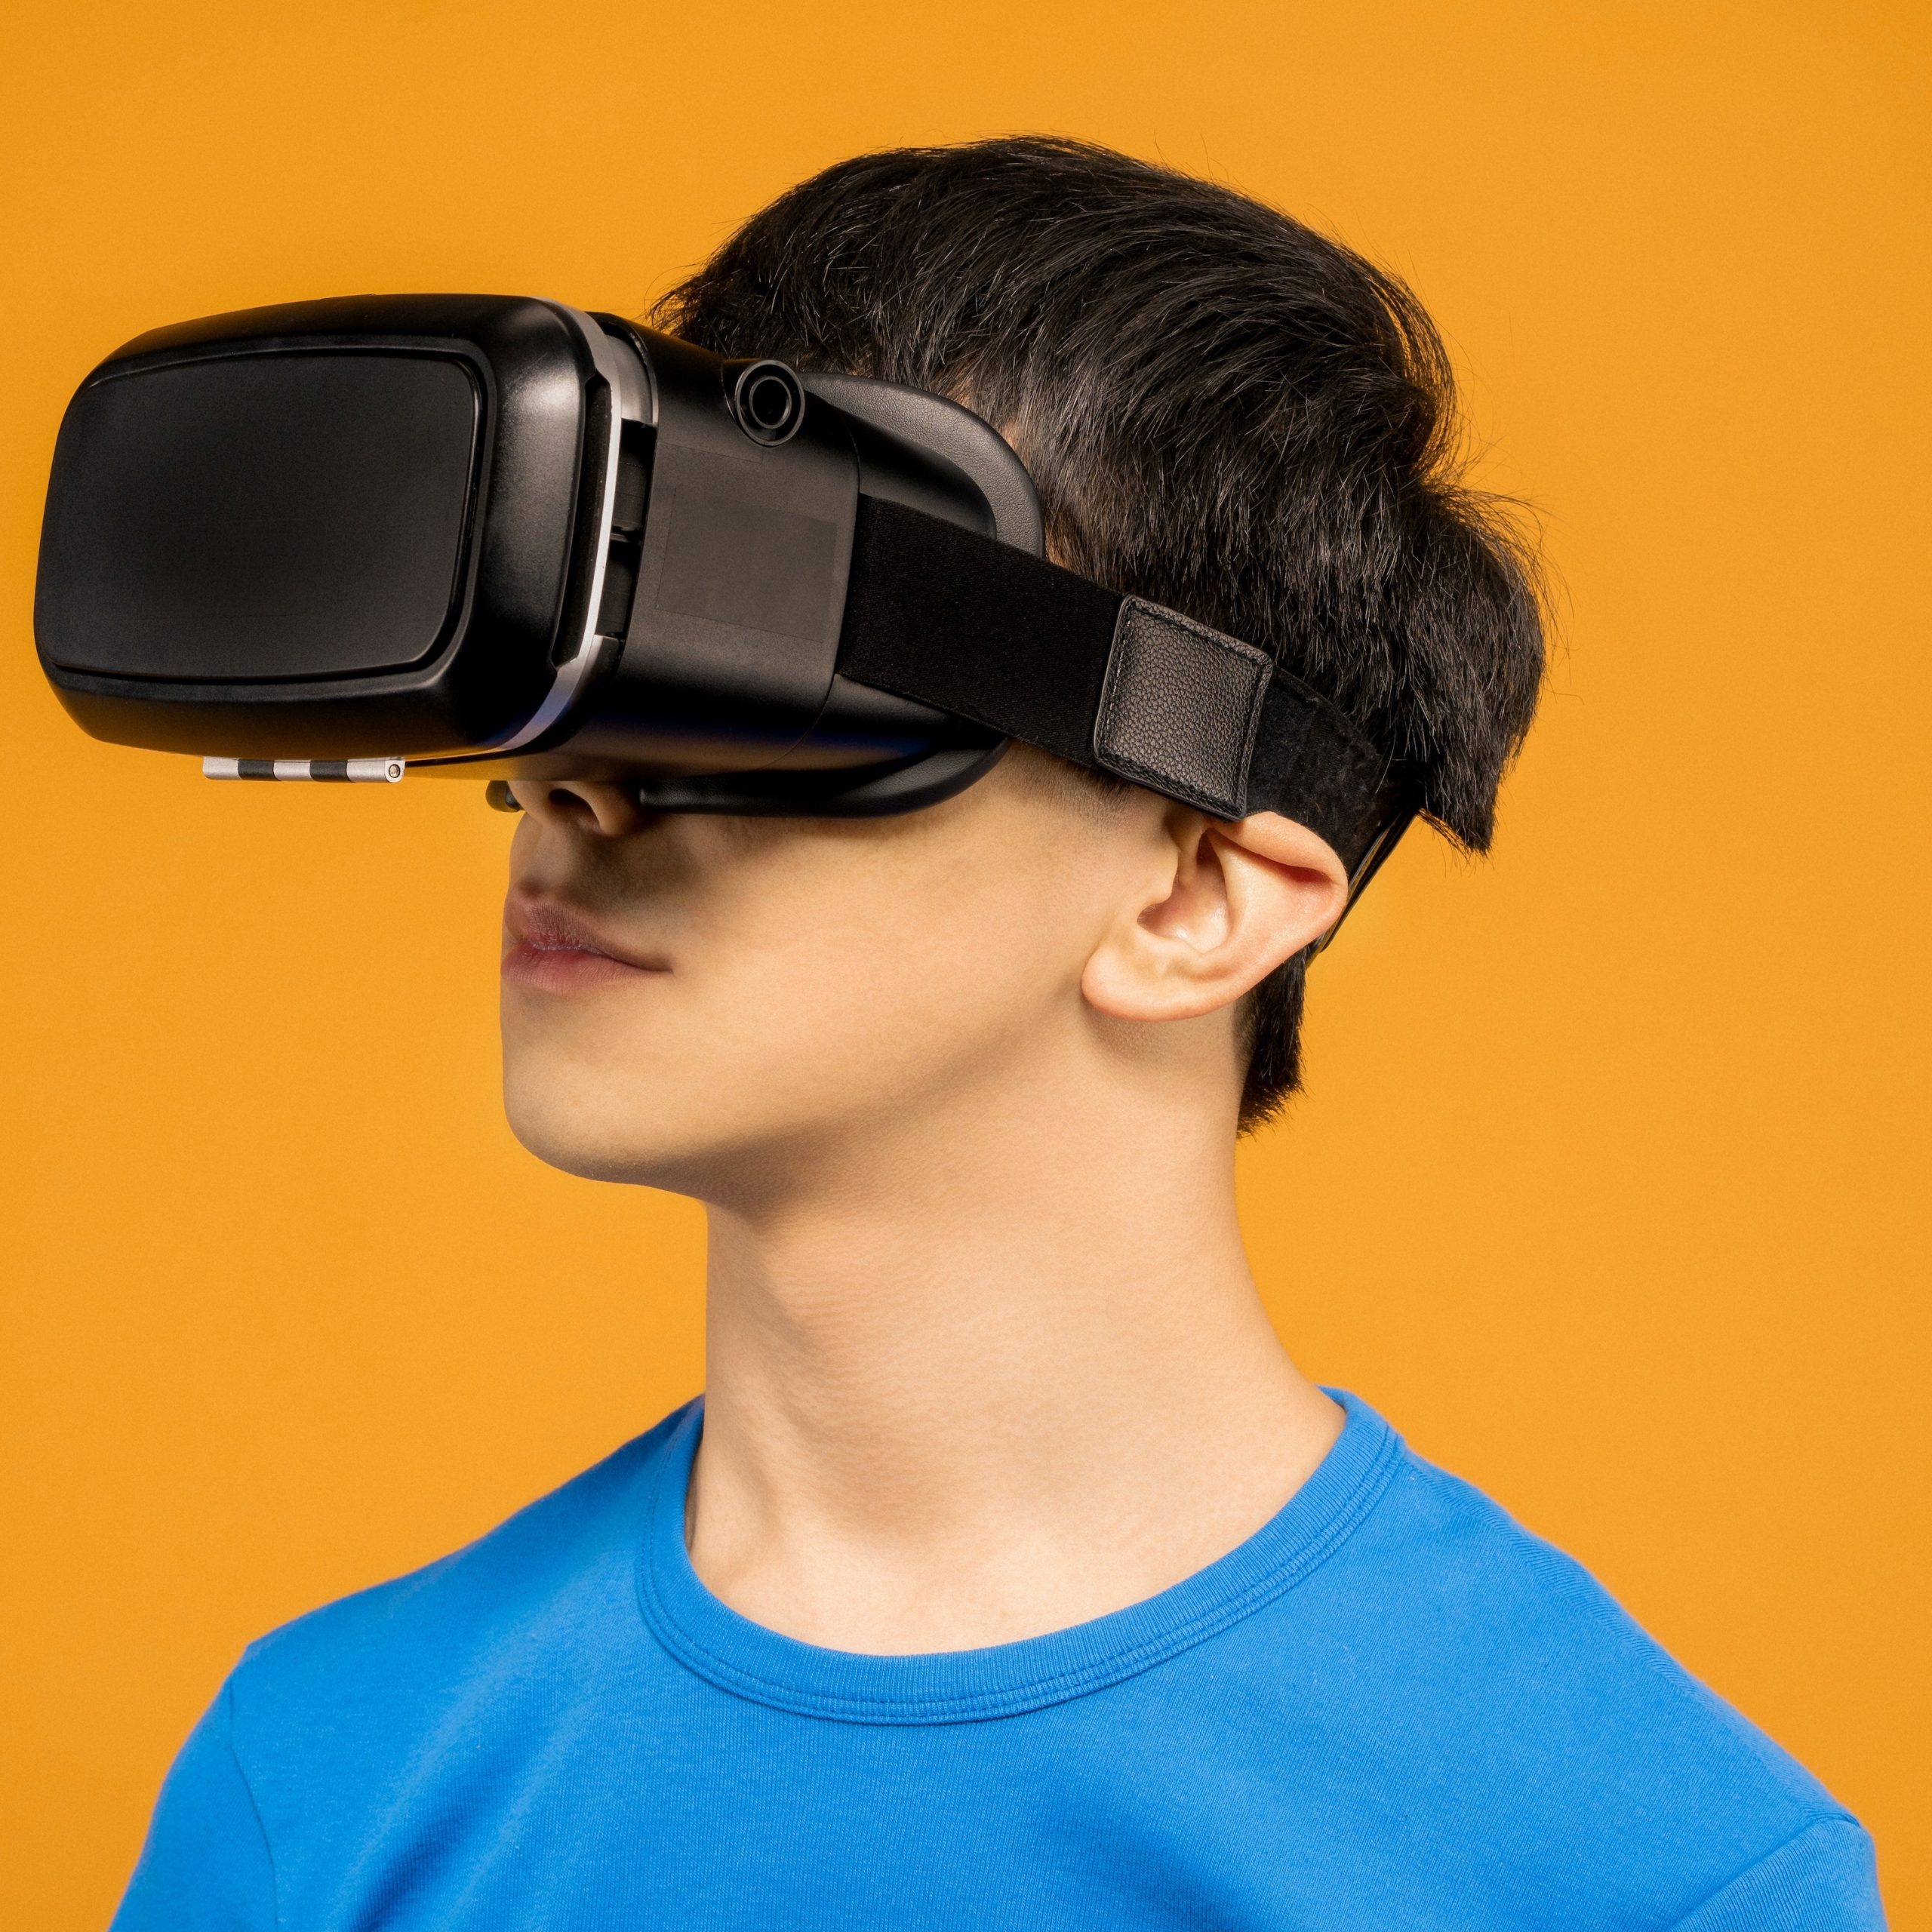 man-in-blue-crew-neck-shirt-wearing-black-vr-headset-3761105-scaled